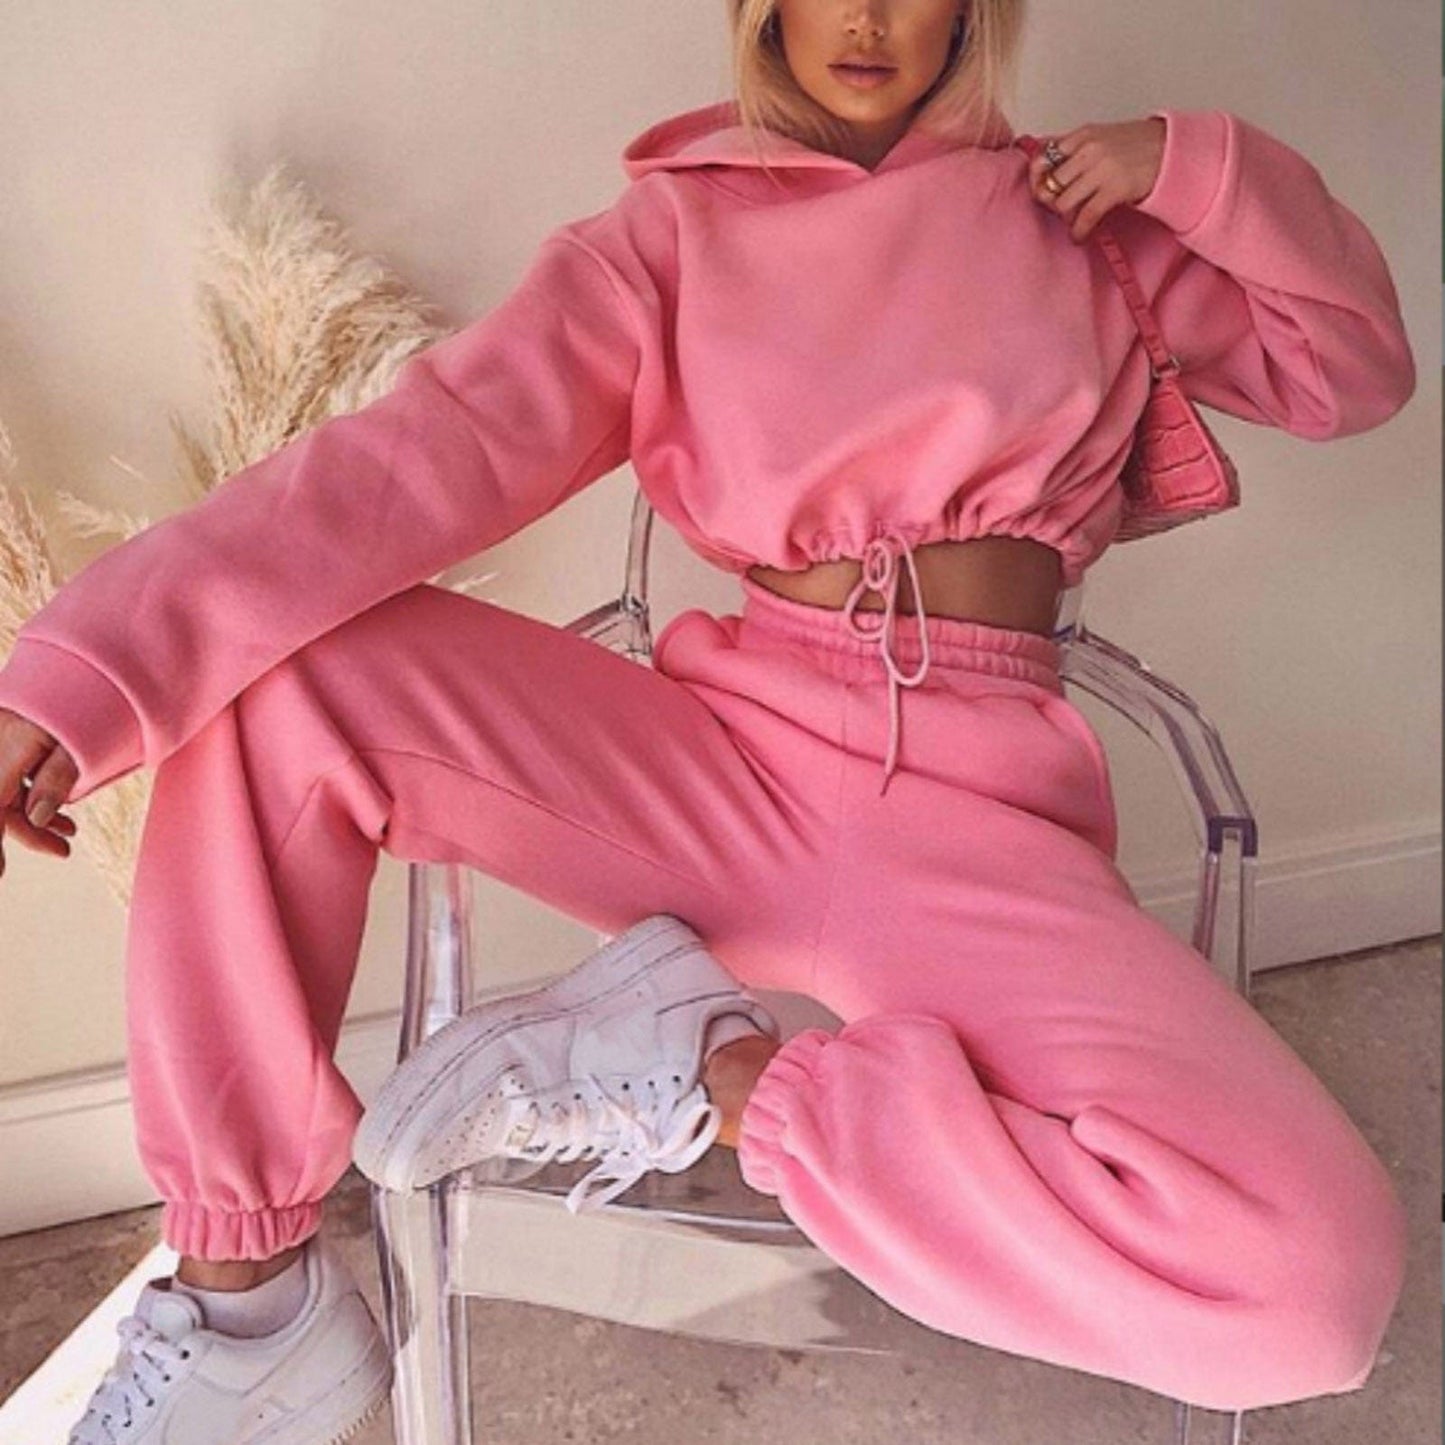 ALLRJ Jogging suit Pink / L Jogging Suits For Women 2 Piece Sweatsuits Tracksuits Sexy Long Sleeve HoodieCasual Fitness Sportswear